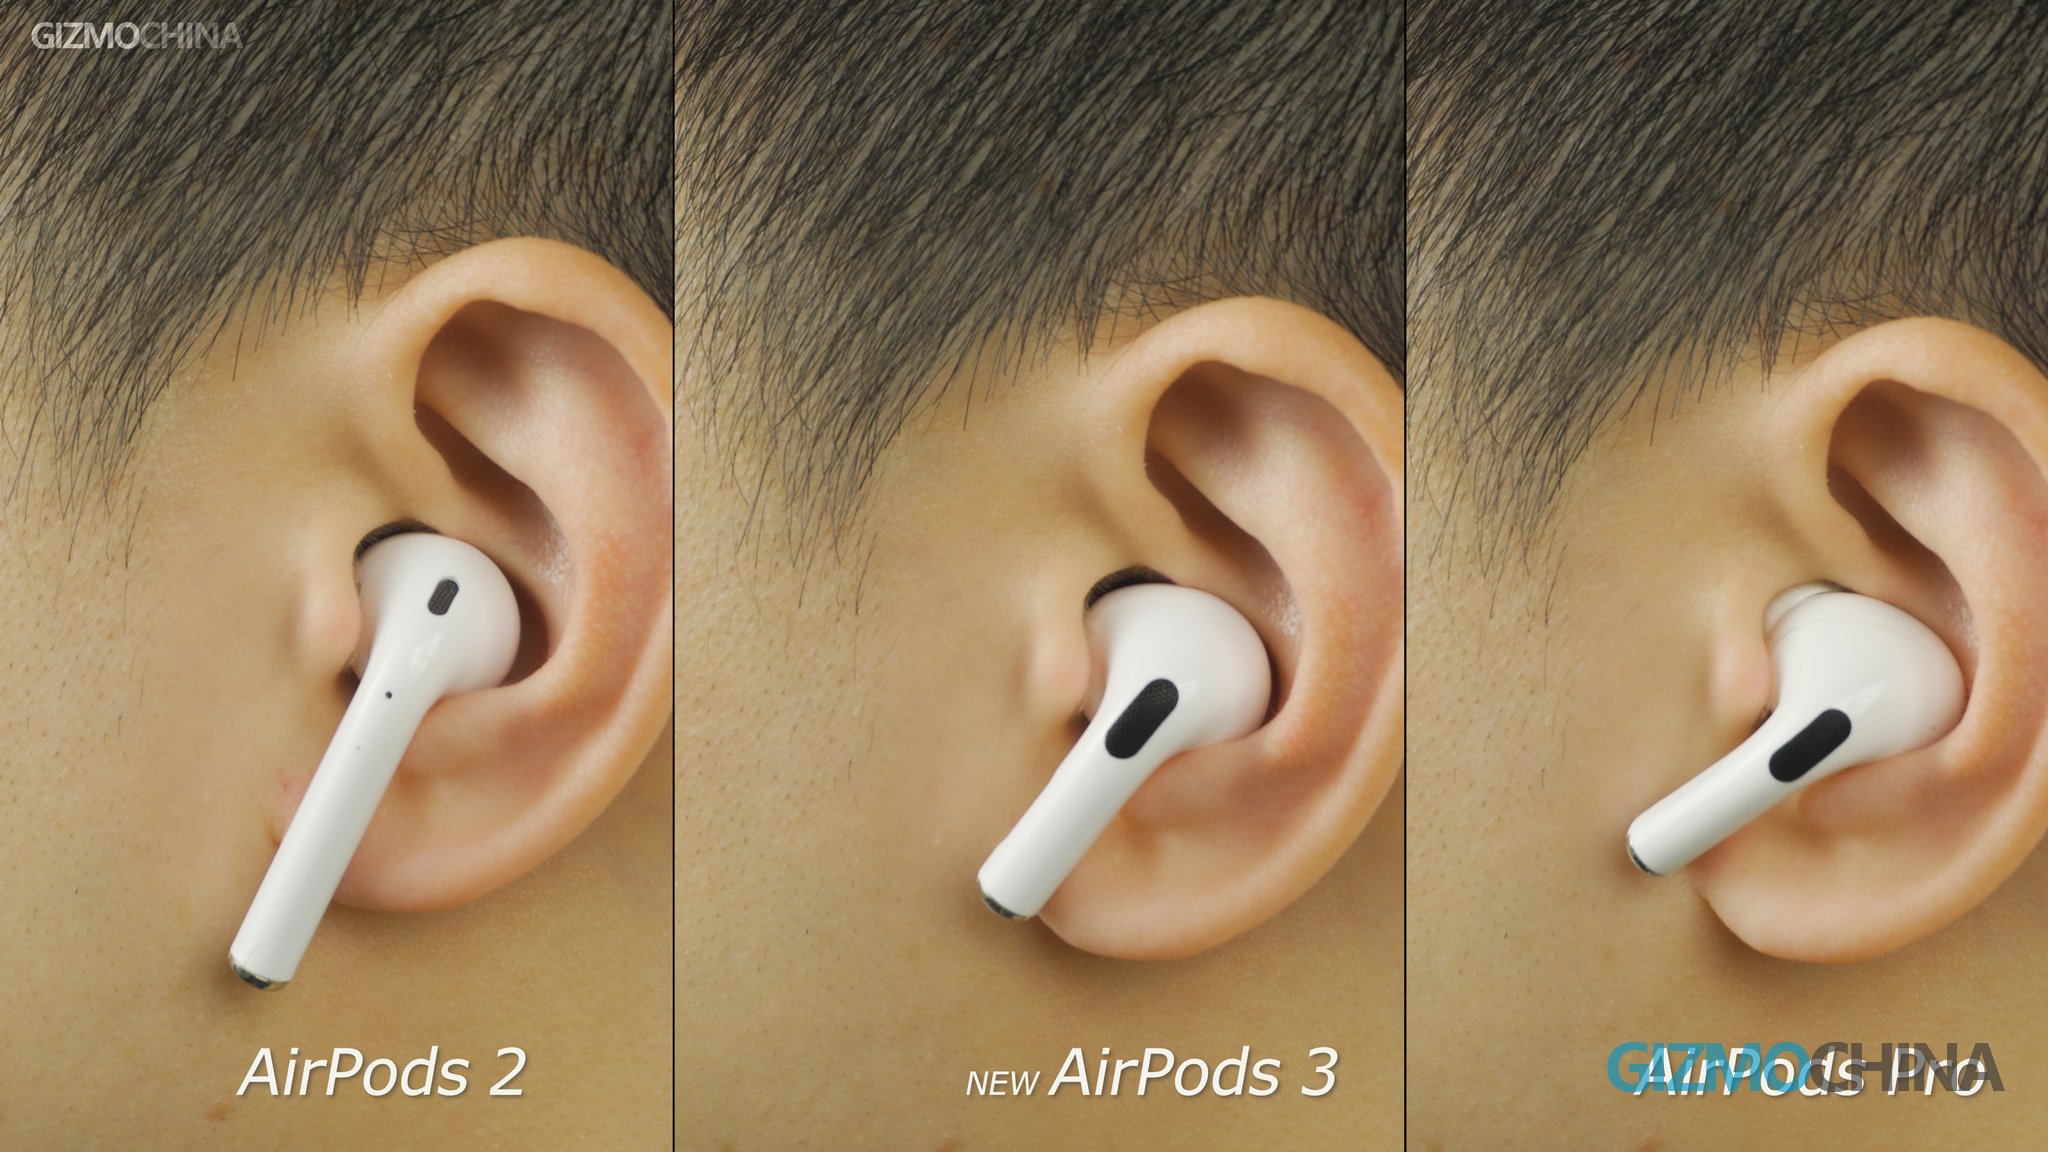 Apple Airpods 3 Clone Hands-on: A closer look at the new AirPods design